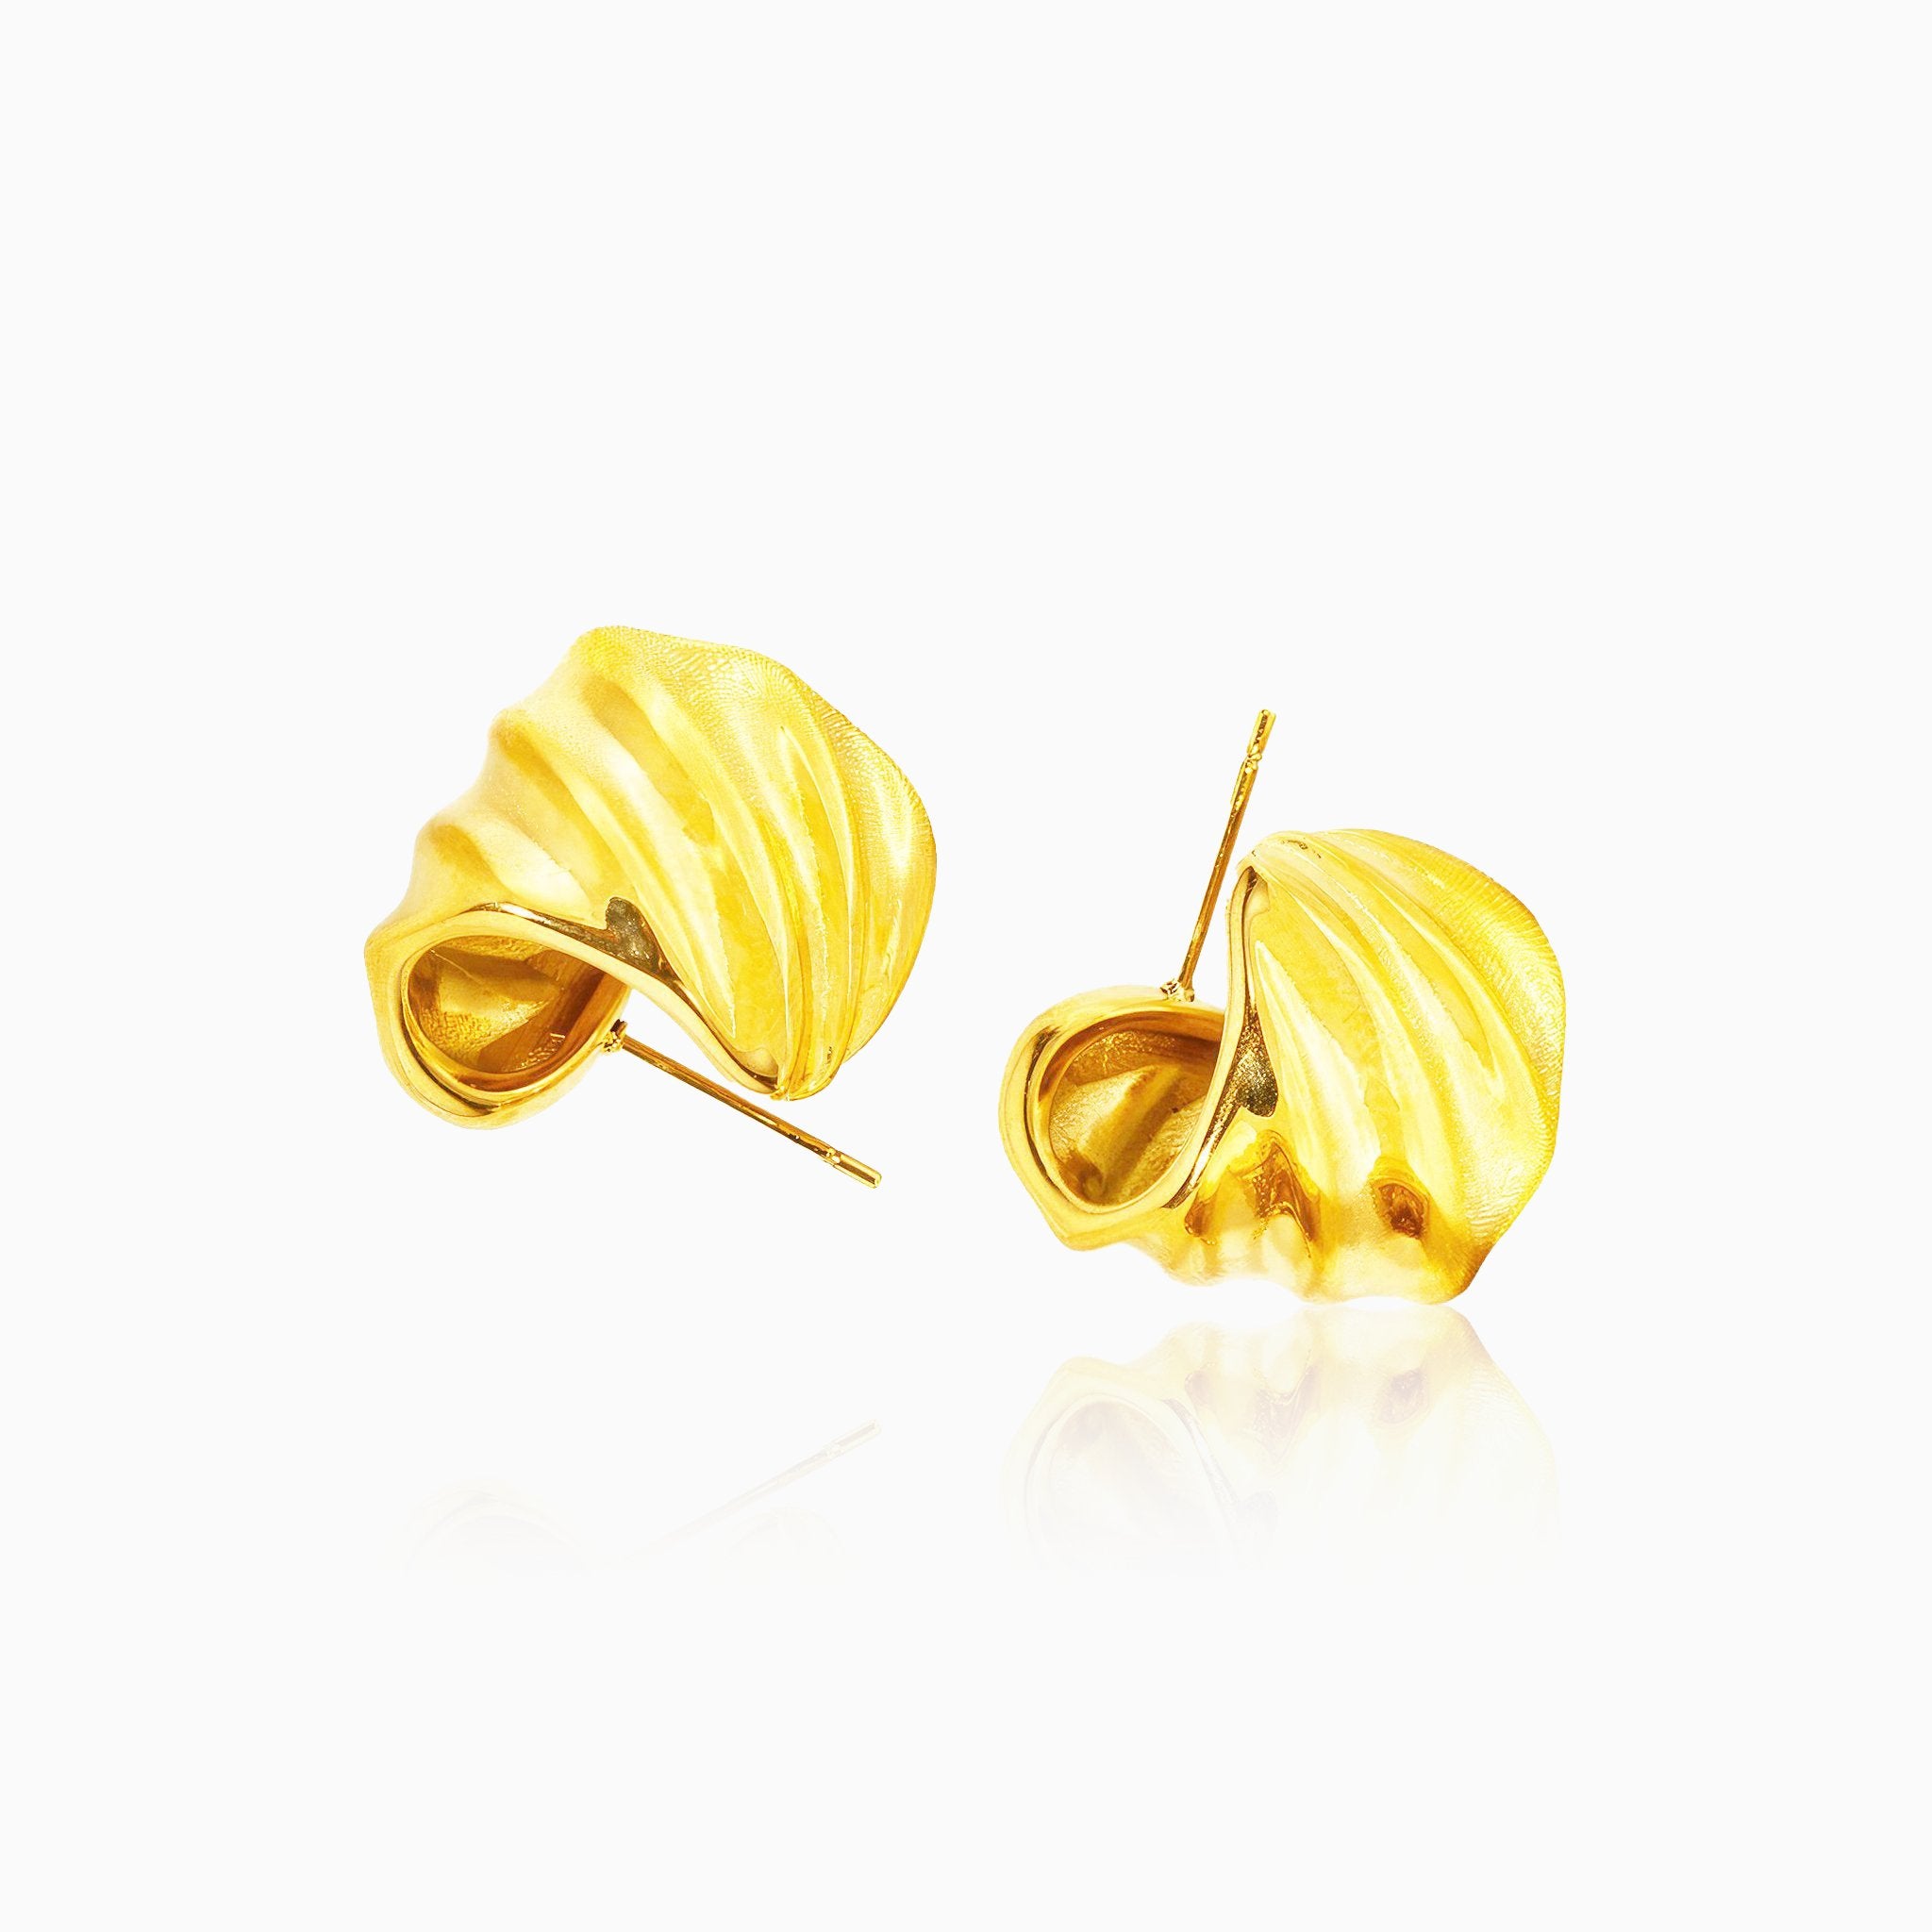 Threaded C-Shape Design Earrings - Nobbier - Earrings - 18K Gold And Titanium PVD Coated Jewelry